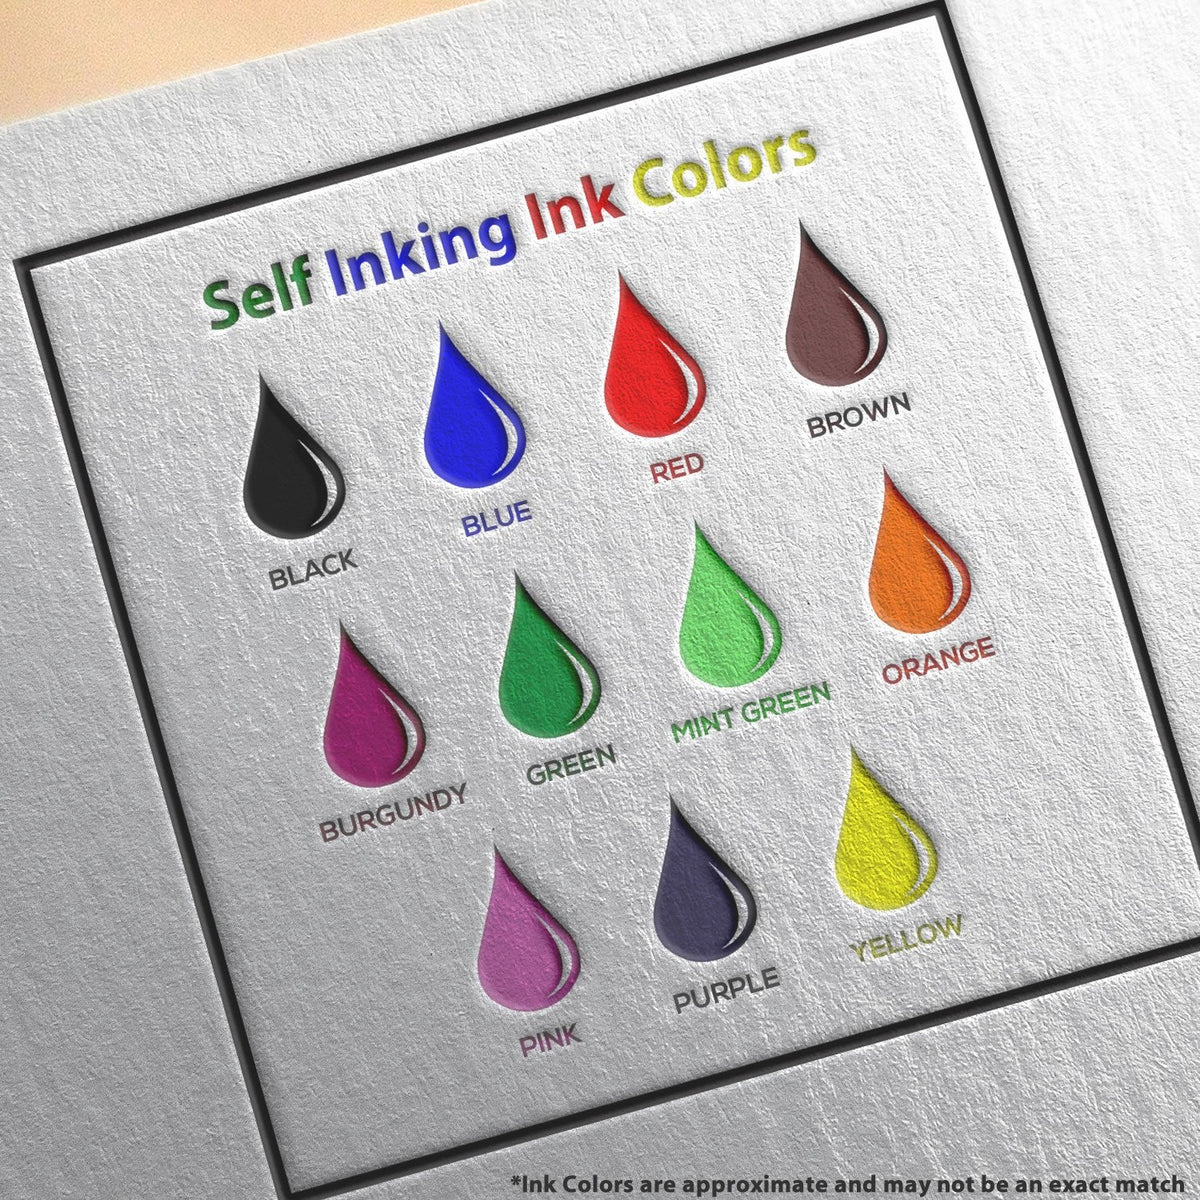 Self-Inking Round A+ Stamp Ink Color Options